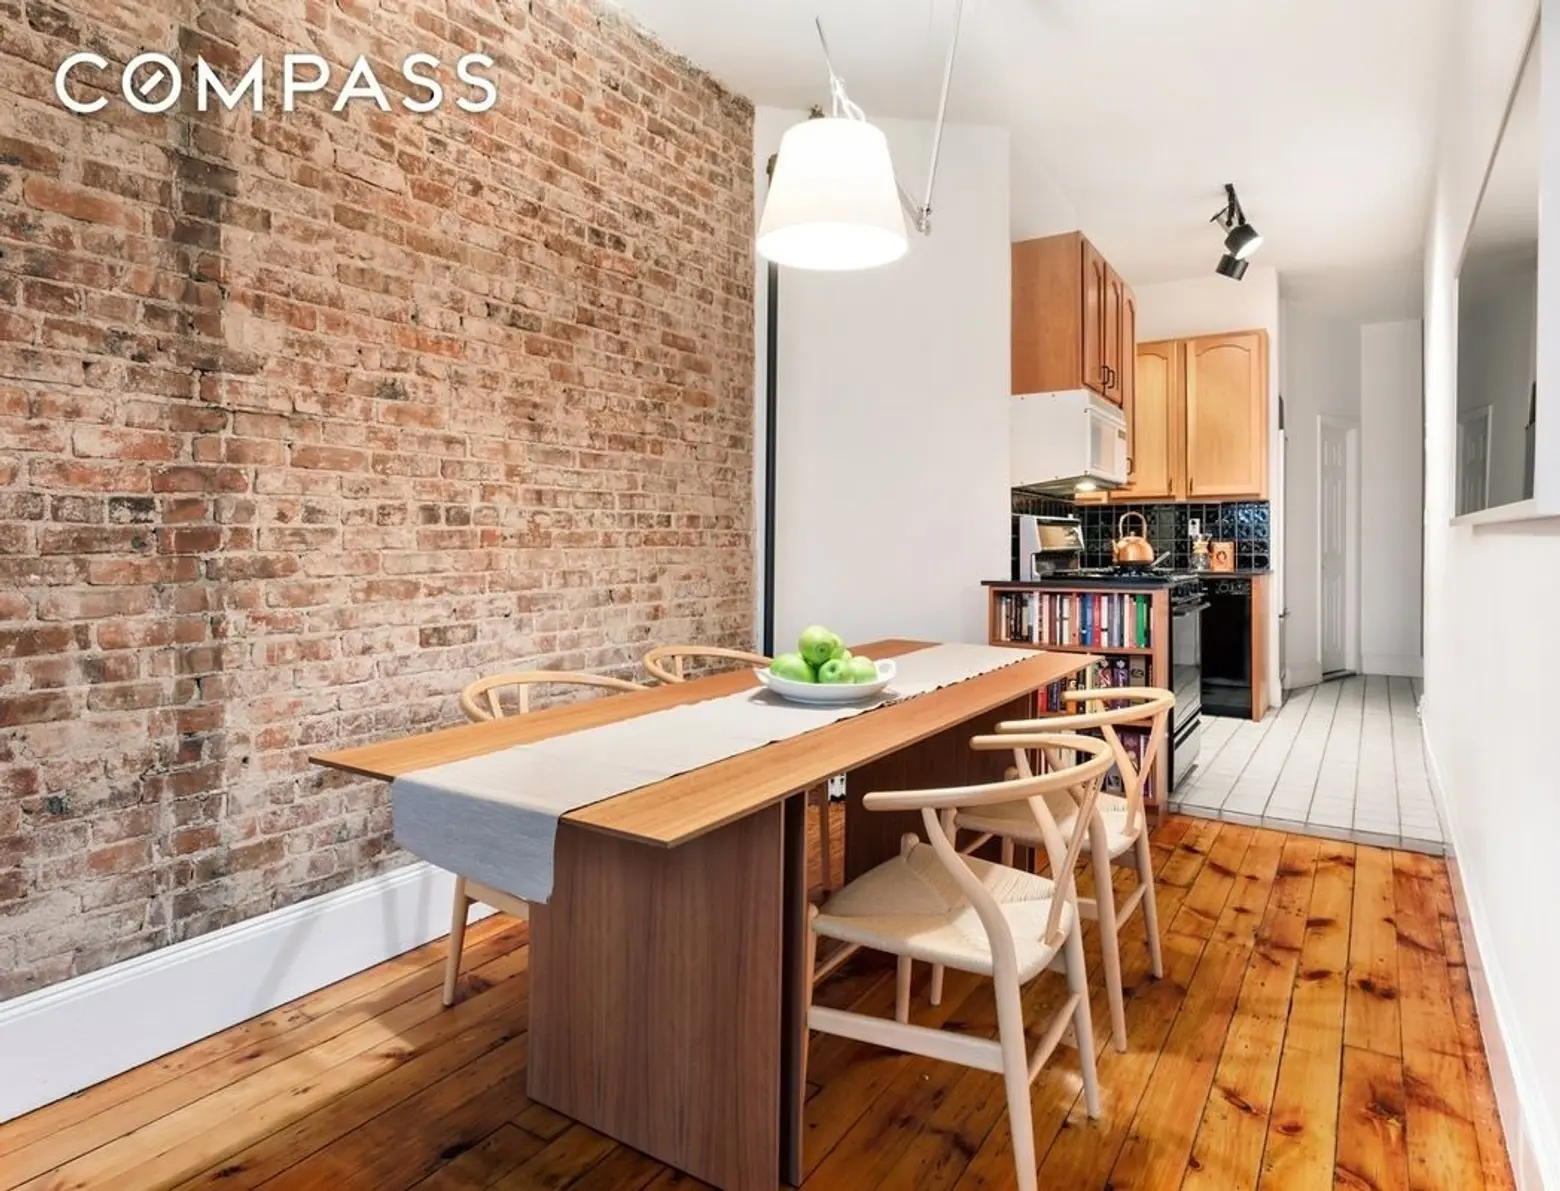 66 4th place, carroll gardens, compass, dining room